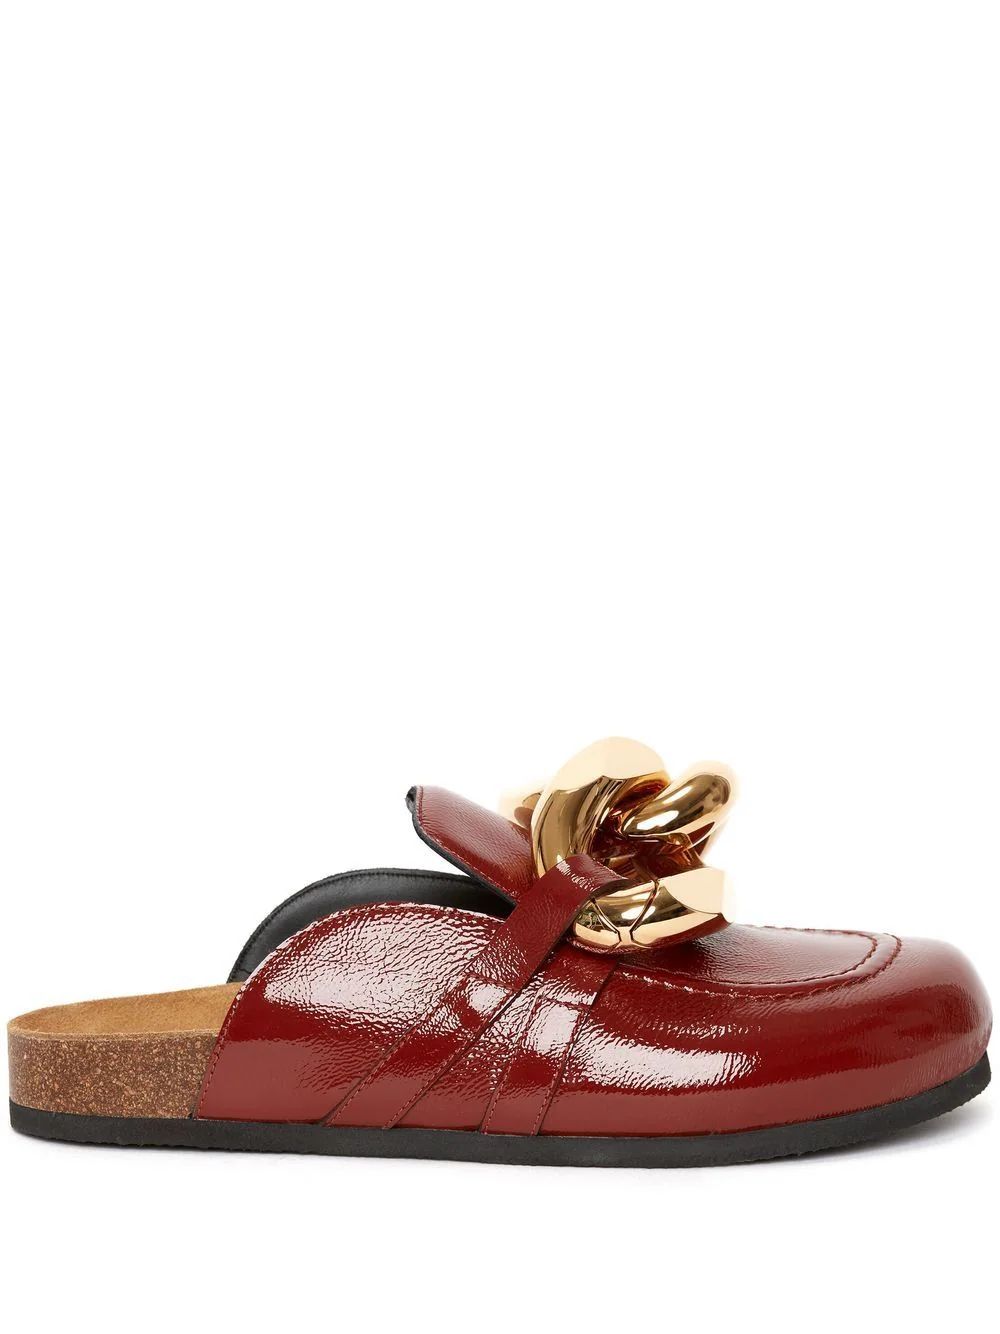 chain-detail leather loafer mules | Farfetch Global